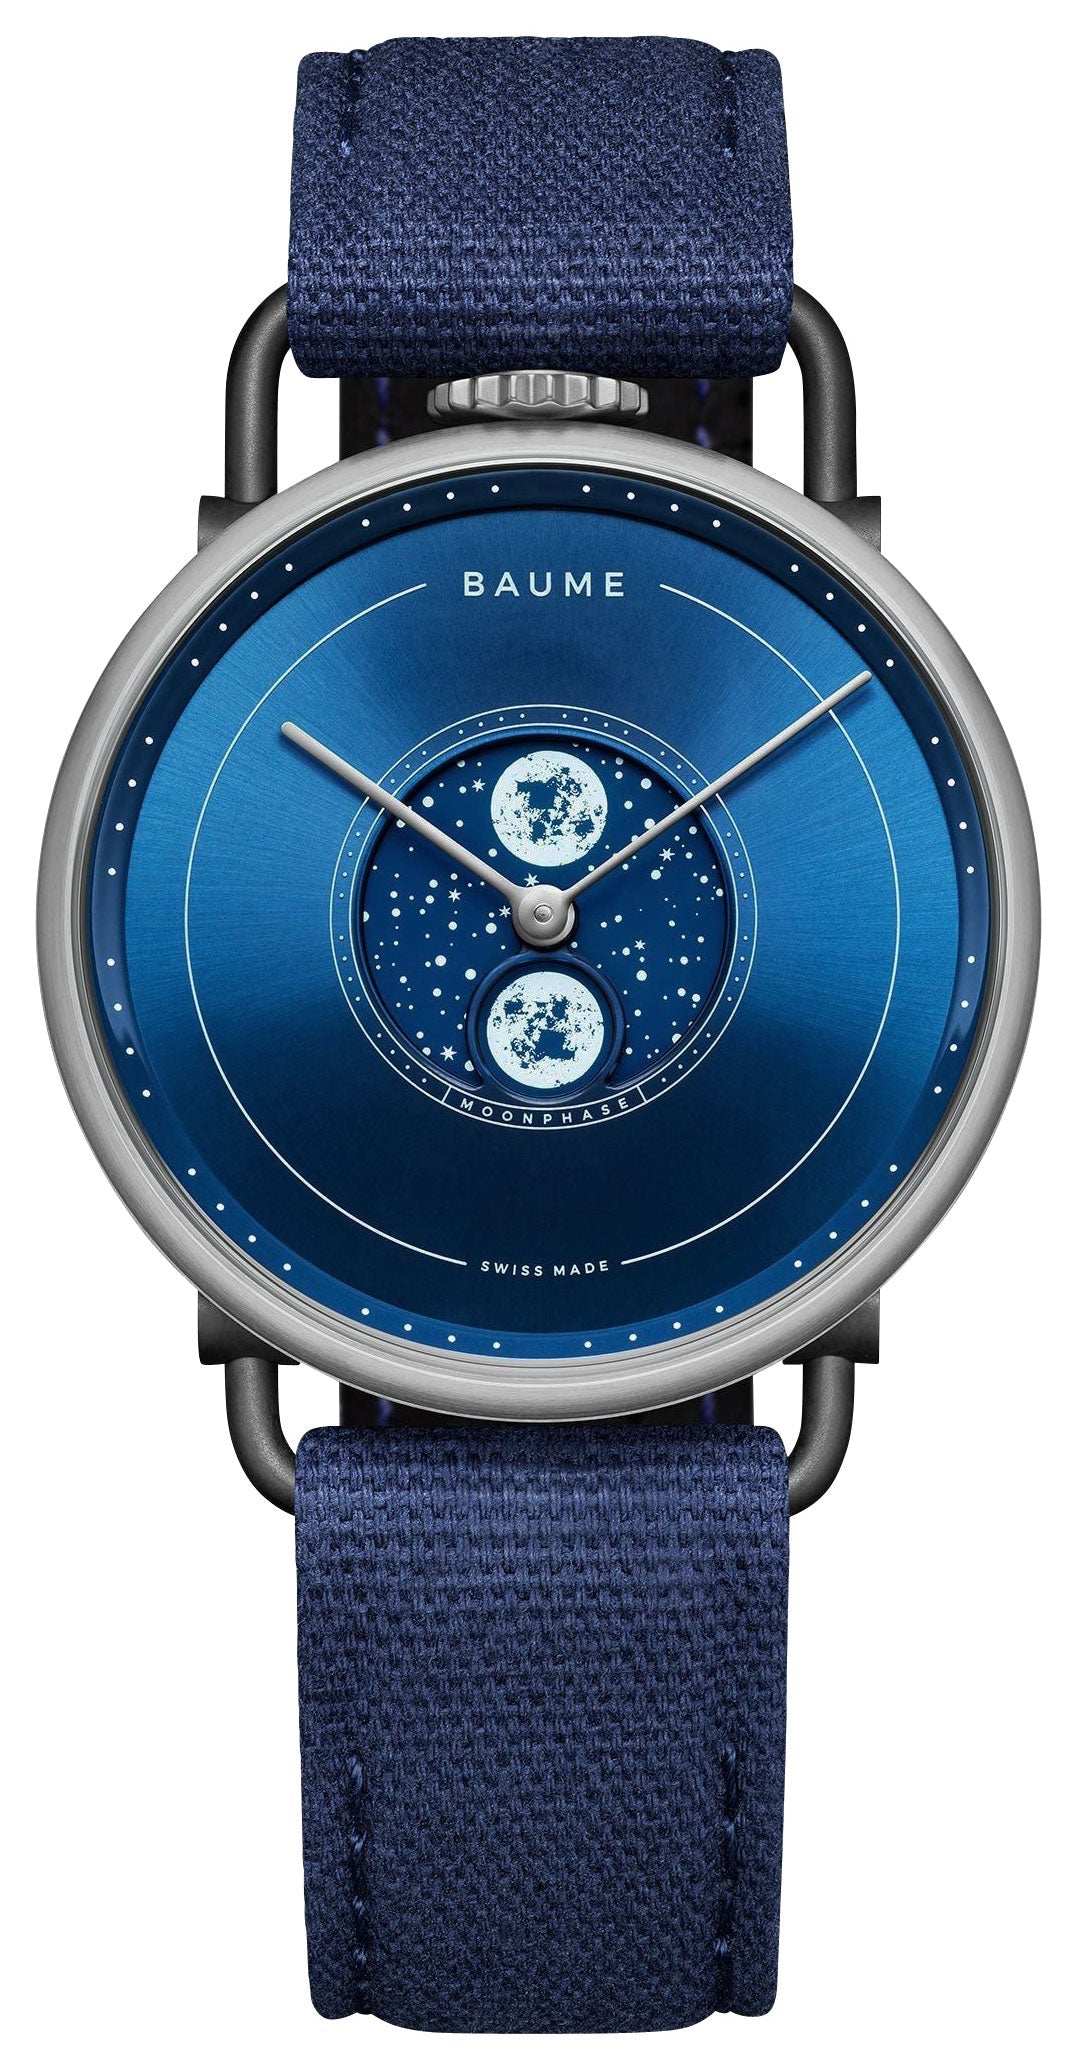 update alt-text with template Watches - Mens-Baume & Mercier-M0A10637-40 - 45 mm, Baume, Baume & Mercier, blue, fabric, mens, menswatches, moonphase, new arrivals, round, rpSKU_2240-STC-00655, rpSKU_FC-712MN4H6, rpSKU_M0A10549, rpSKU_M0A10600, rpSKU_M0A10601, stainless steel case, swiss quartz, two-tone case, watches-Watches & Beyond